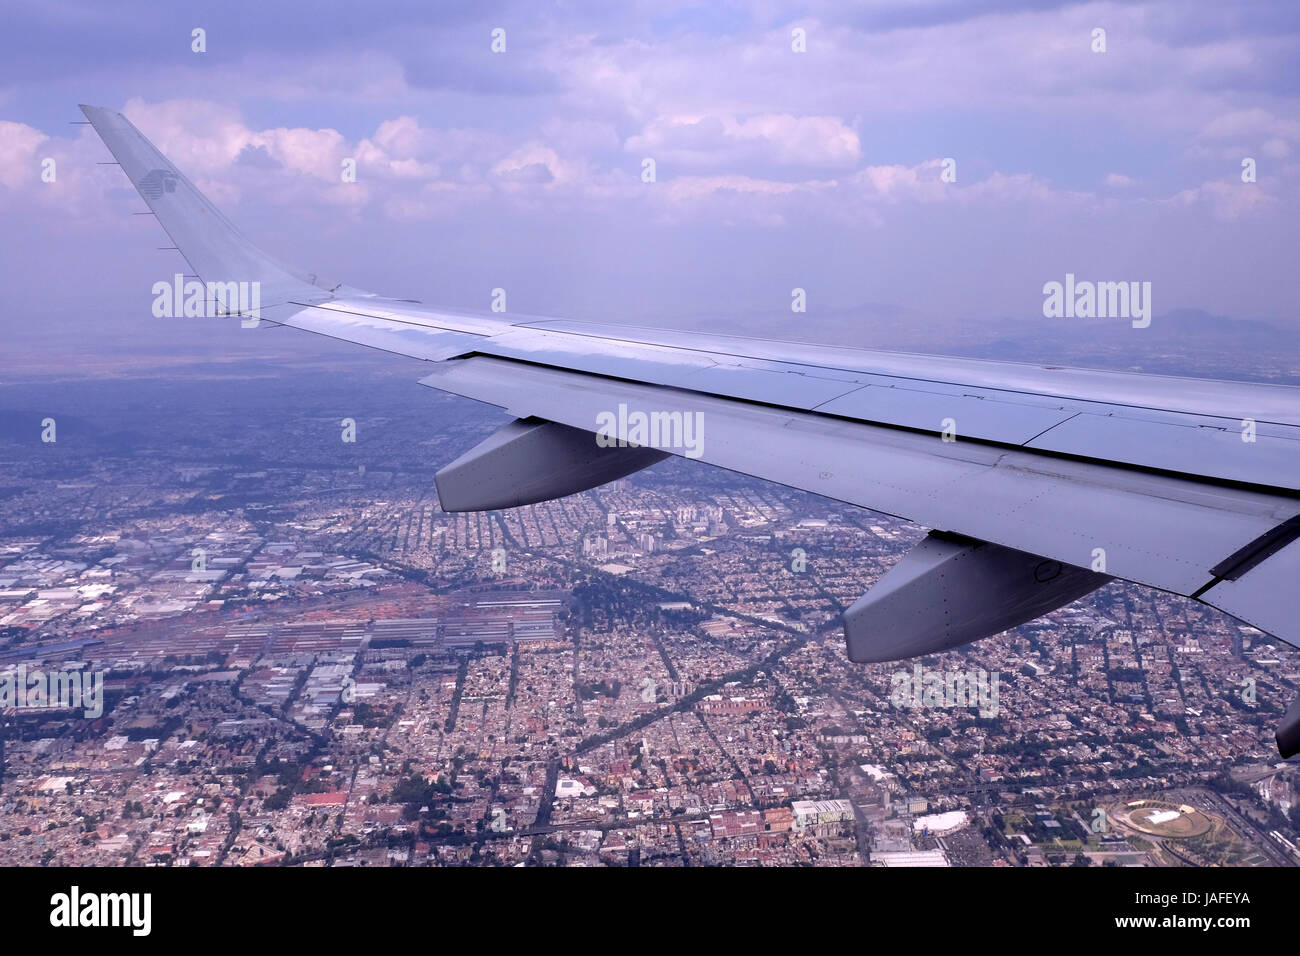 Wing of Aeromexico, the flag carrier airline of Mexico over Mexico city Stock Photo